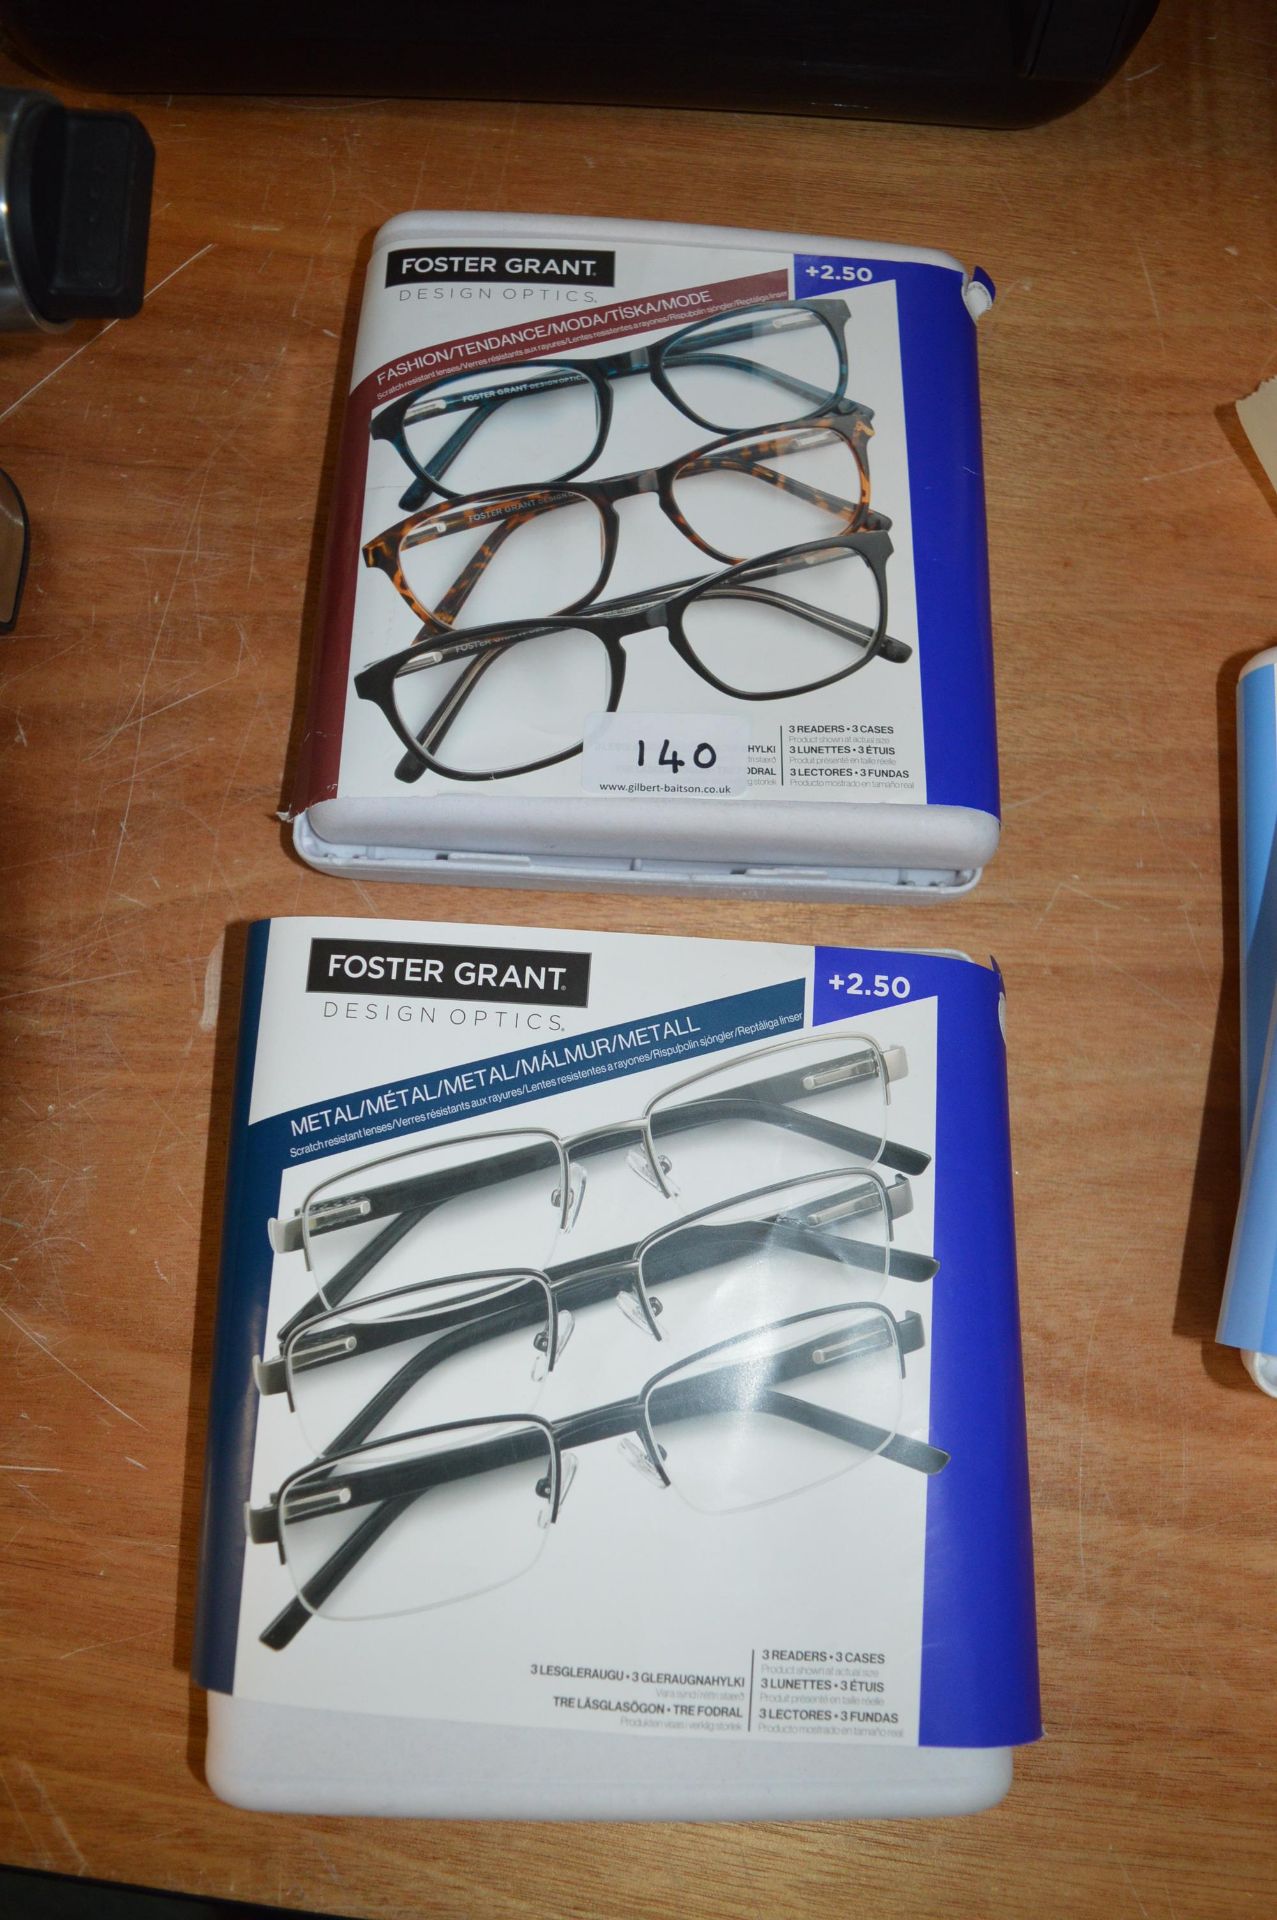 *Two Packs of Foster Grant Reading Glasses +2.50